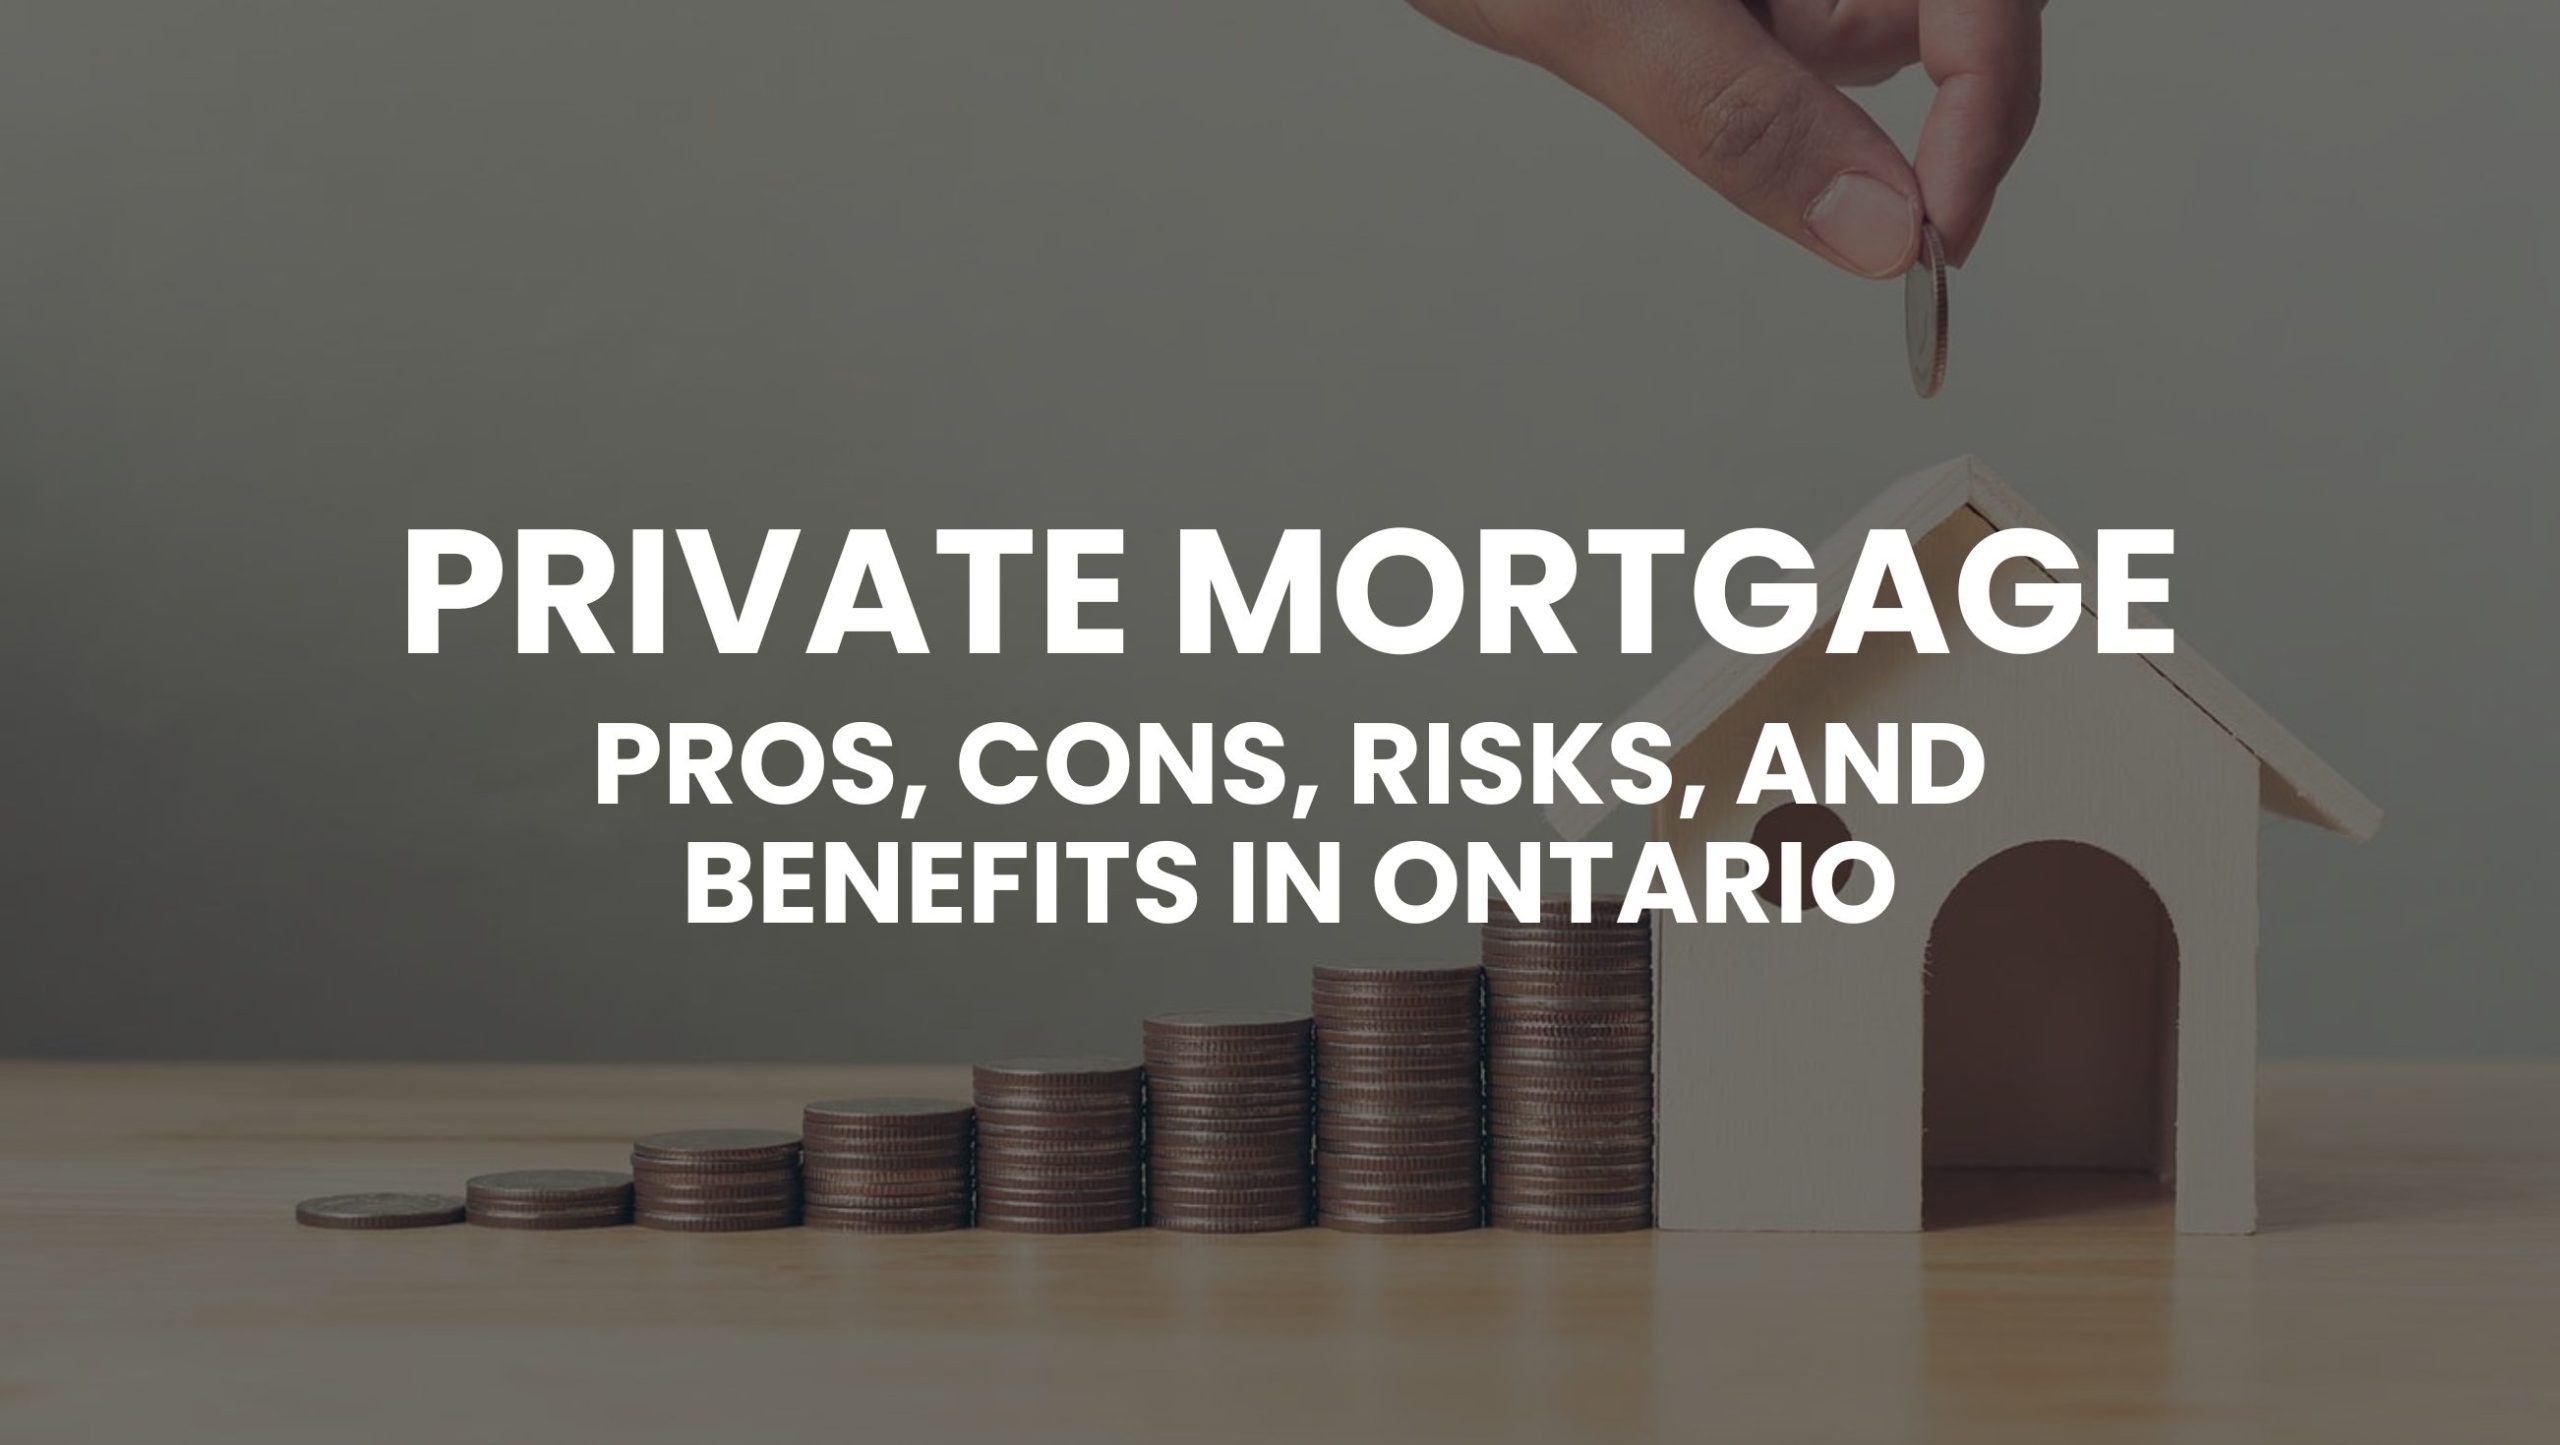 You are currently viewing Private Mortgage: Pros, Cons, Risks, and Benefits in Ontario